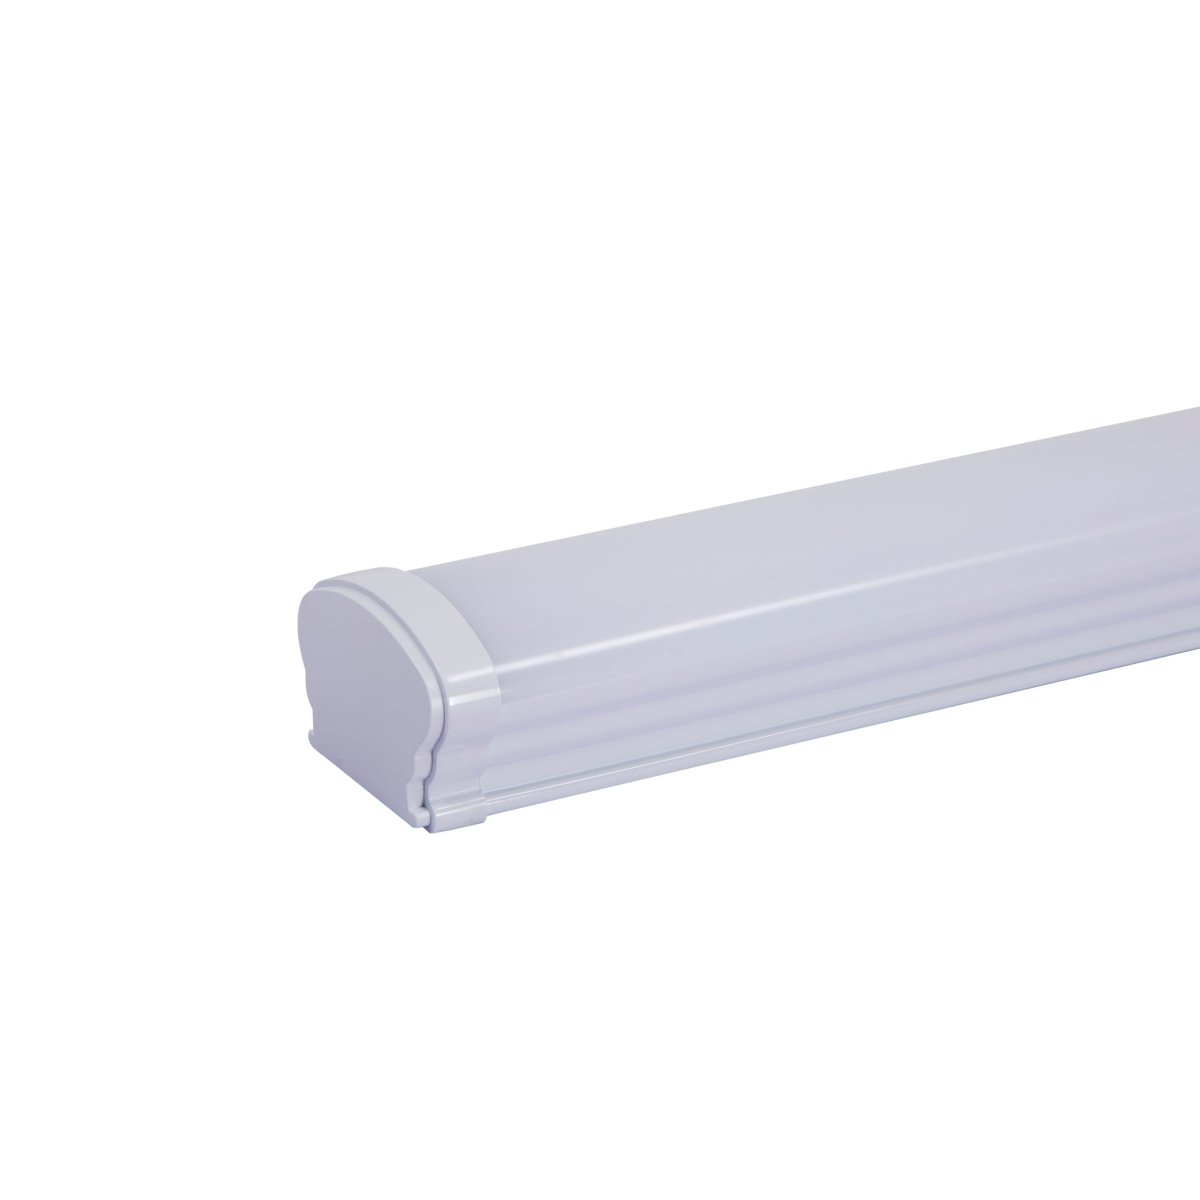 Main image of LED Tri-proof Batten Linear Fitting 48W 4000K Cool White IP65 120cm 4ft